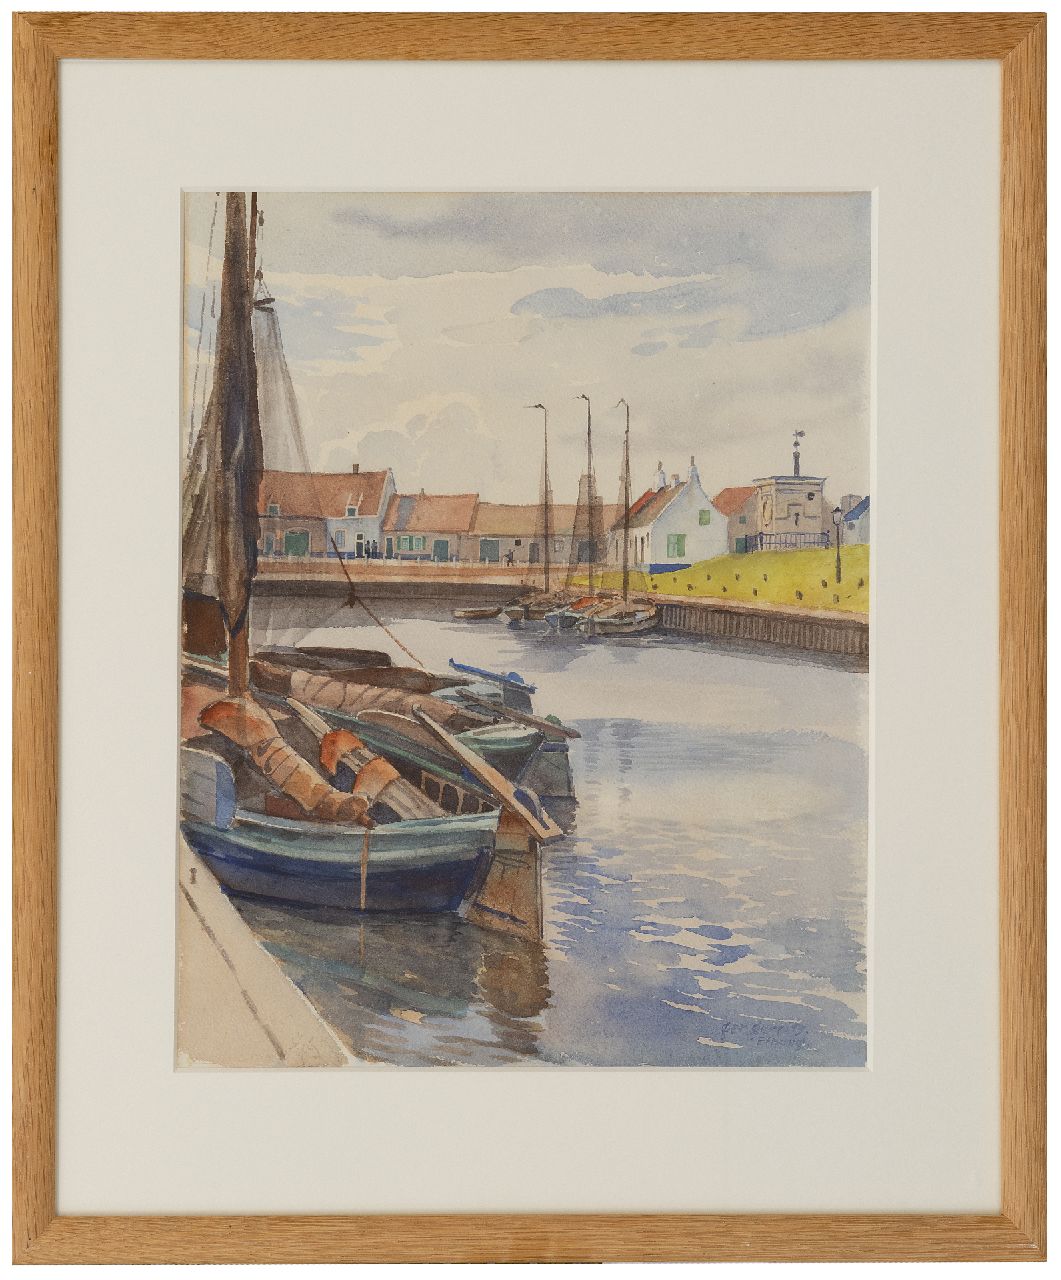 Gerrits G.J.  | Gerrit Jacobus 'Ger' Gerrits | Watercolours and drawings offered for sale | Harbourview, Elburg, watercolour on paper 37.7 x 30.9 cm, signed l.r. and painted ca. 1939